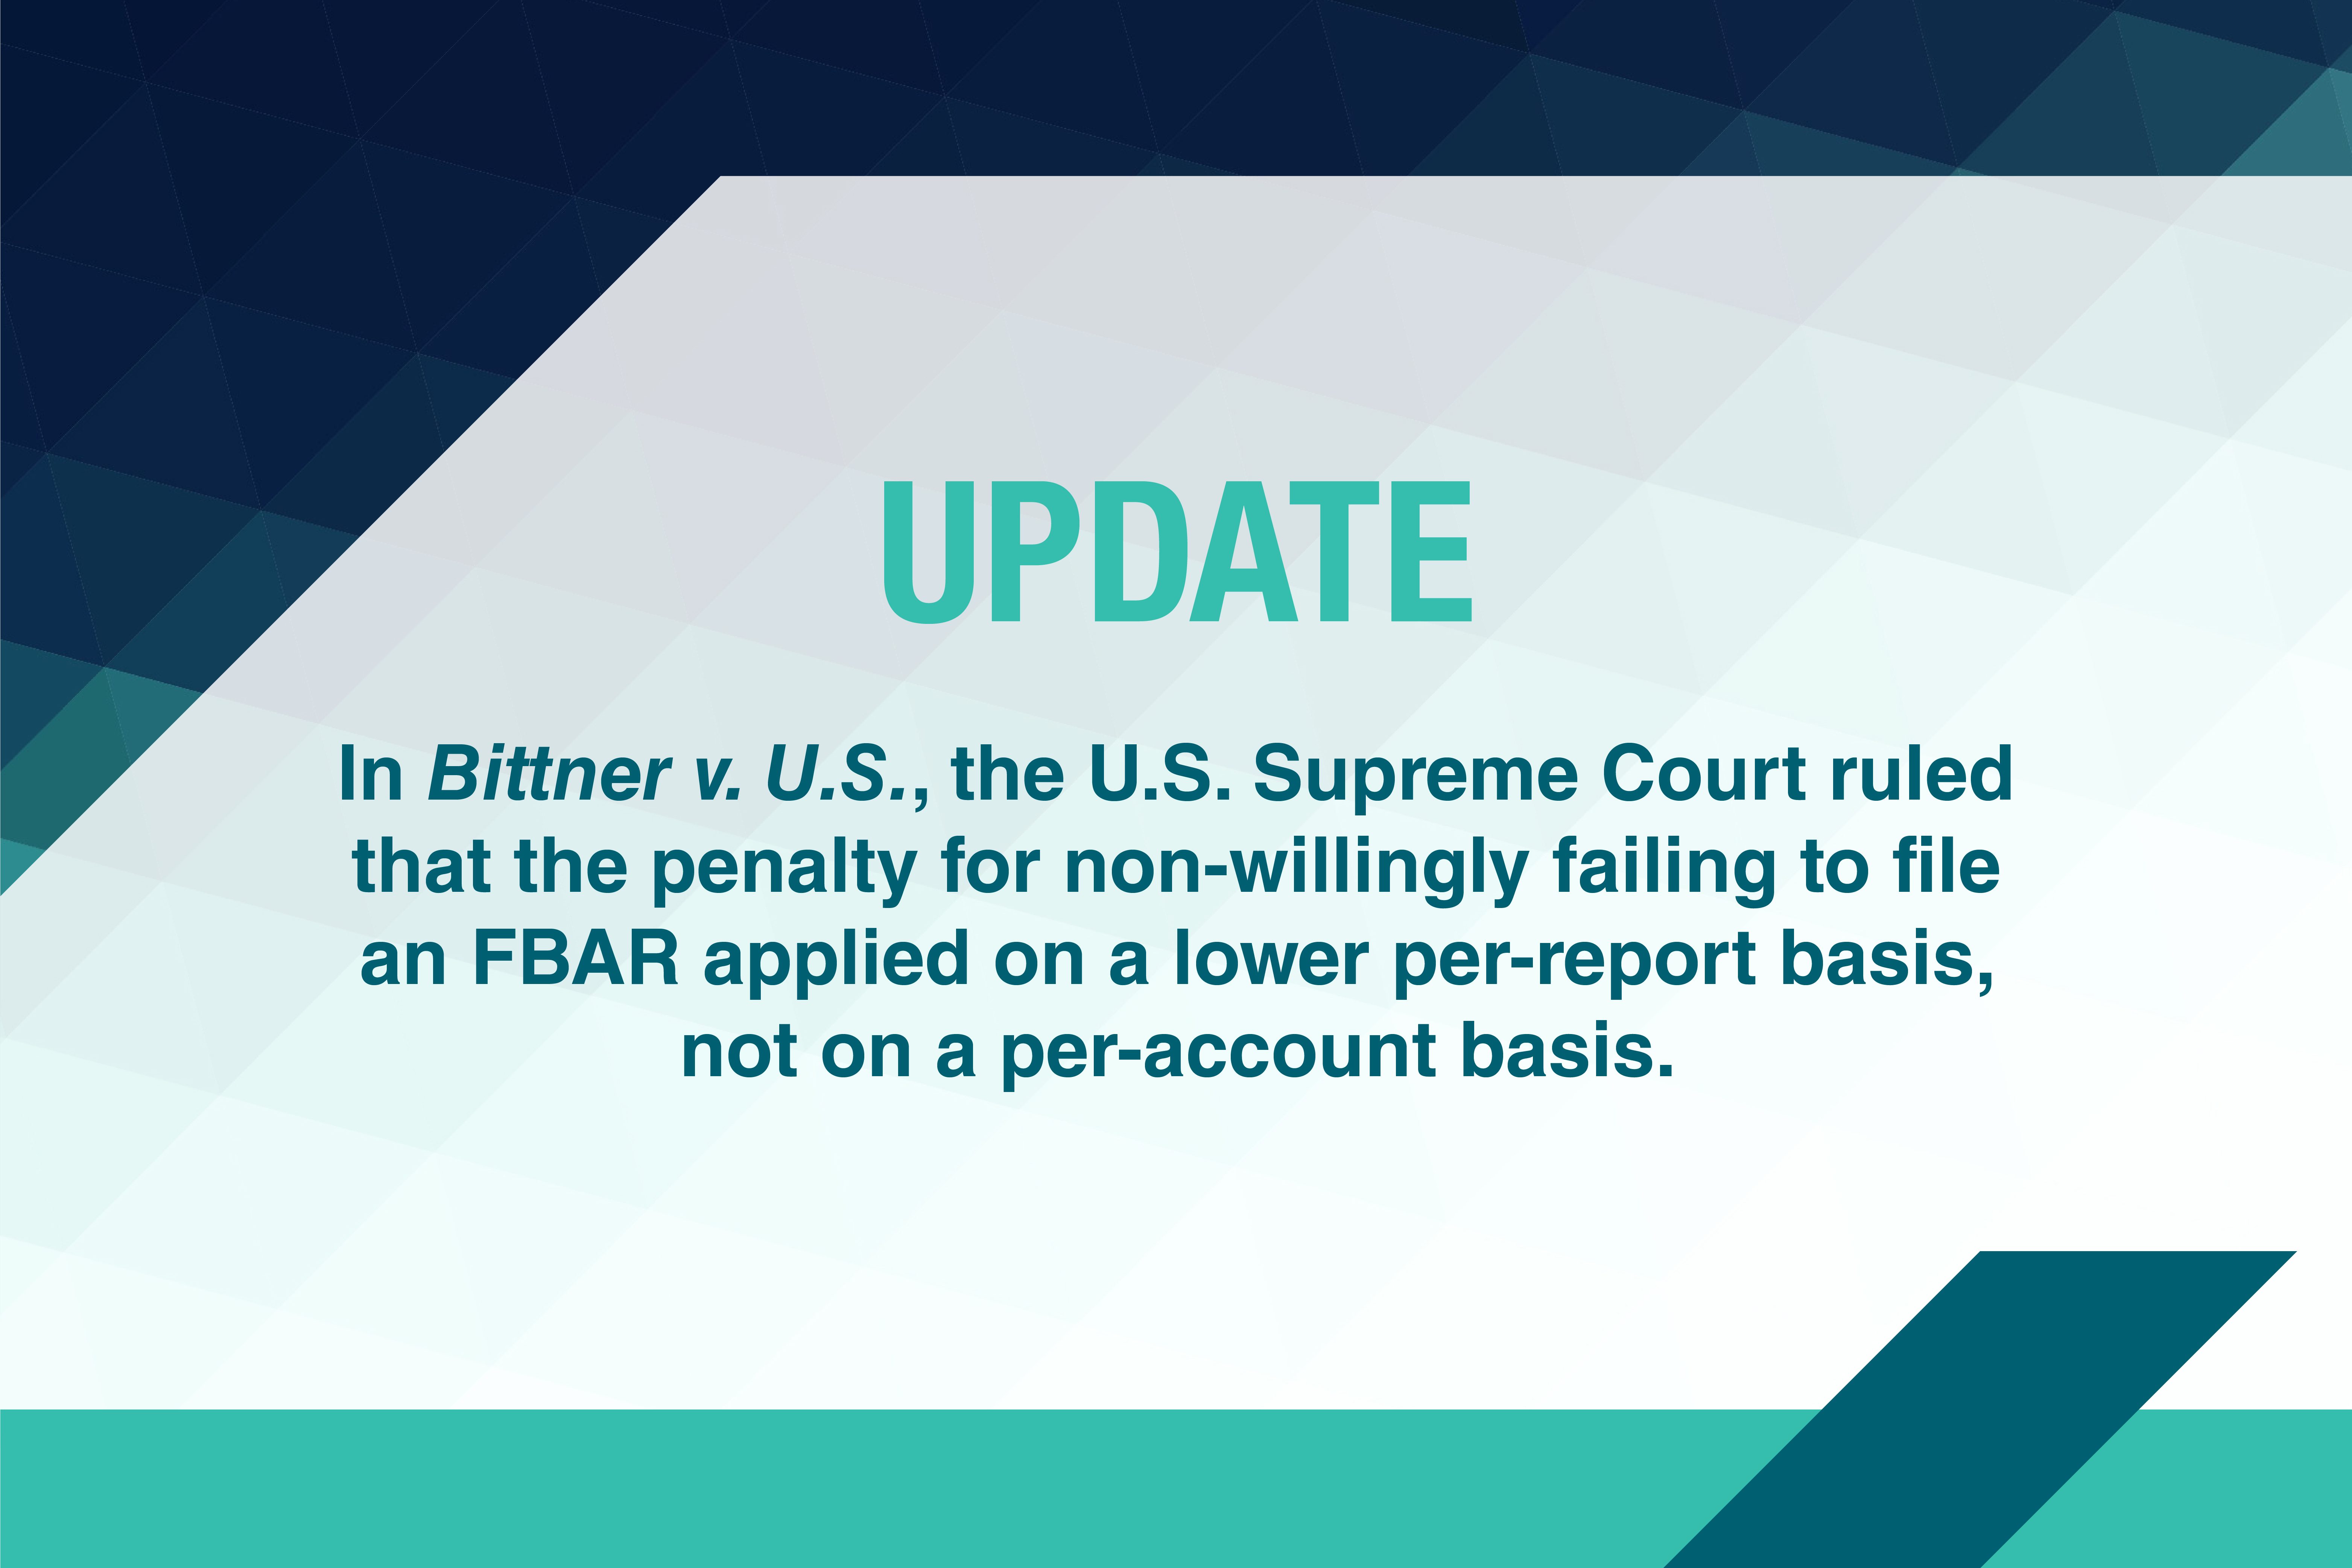 U.S. Supreme Court rules against the IRS on critical FBAR issue